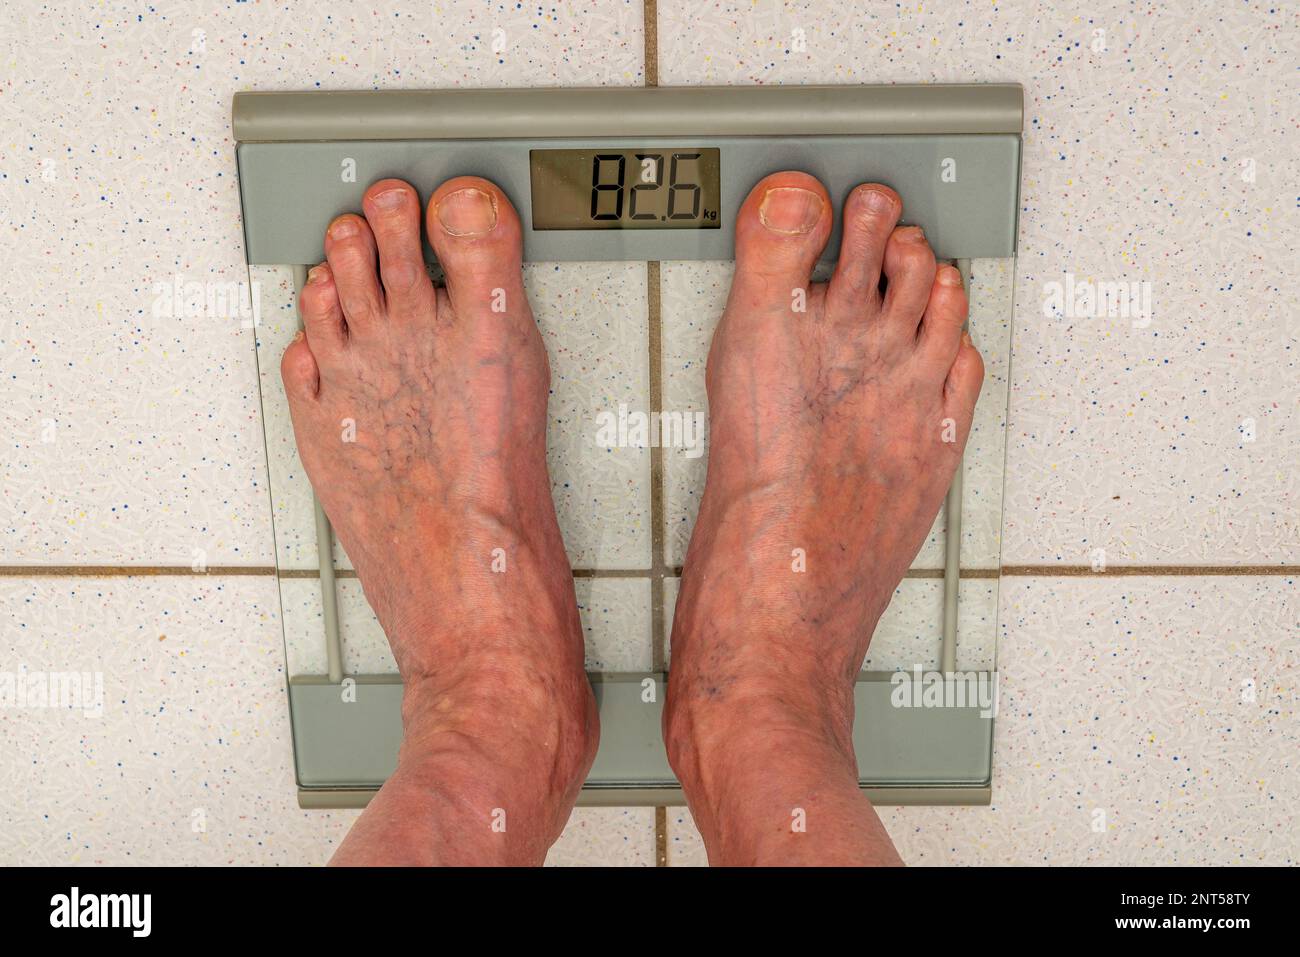 https://c8.alamy.com/comp/2NT58TY/legs-of-an-elderly-man-with-swollen-veins-standing-on-a-floor-scale-close-up-2NT58TY.jpg